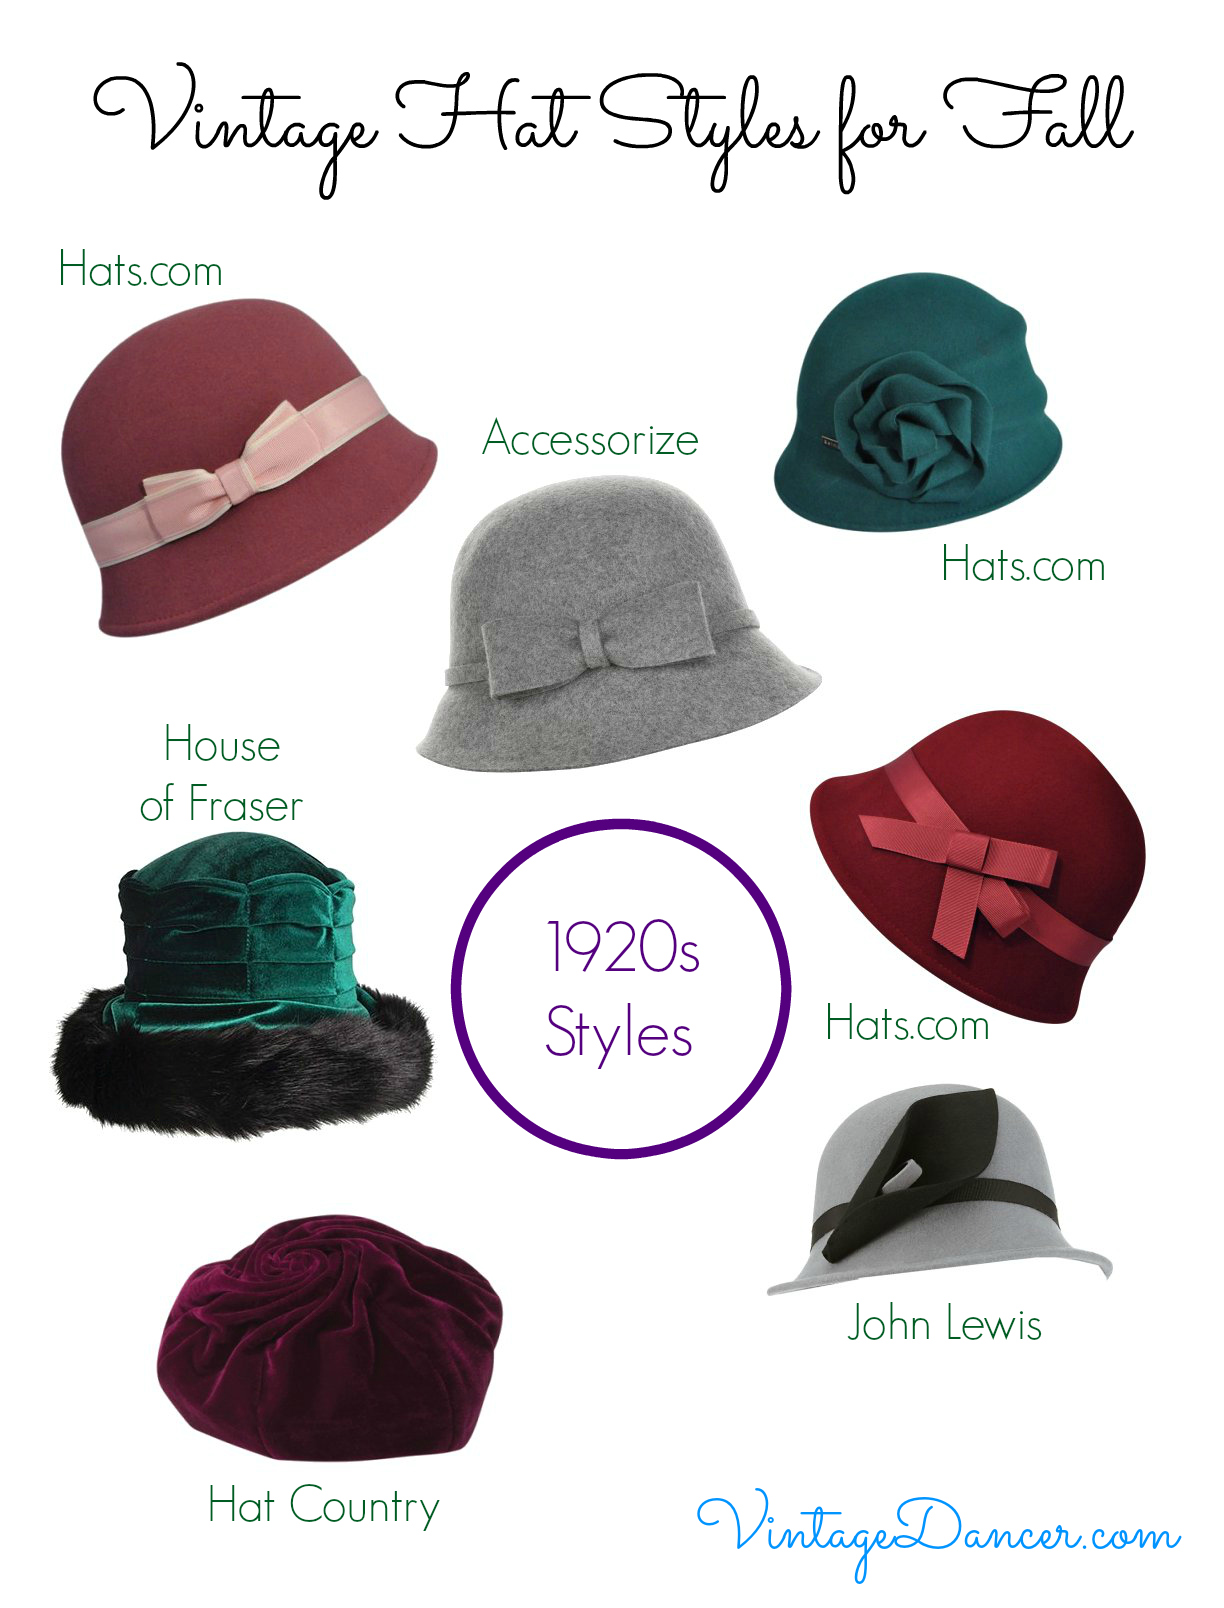 Vintage Hat Styles for Fall/Winter